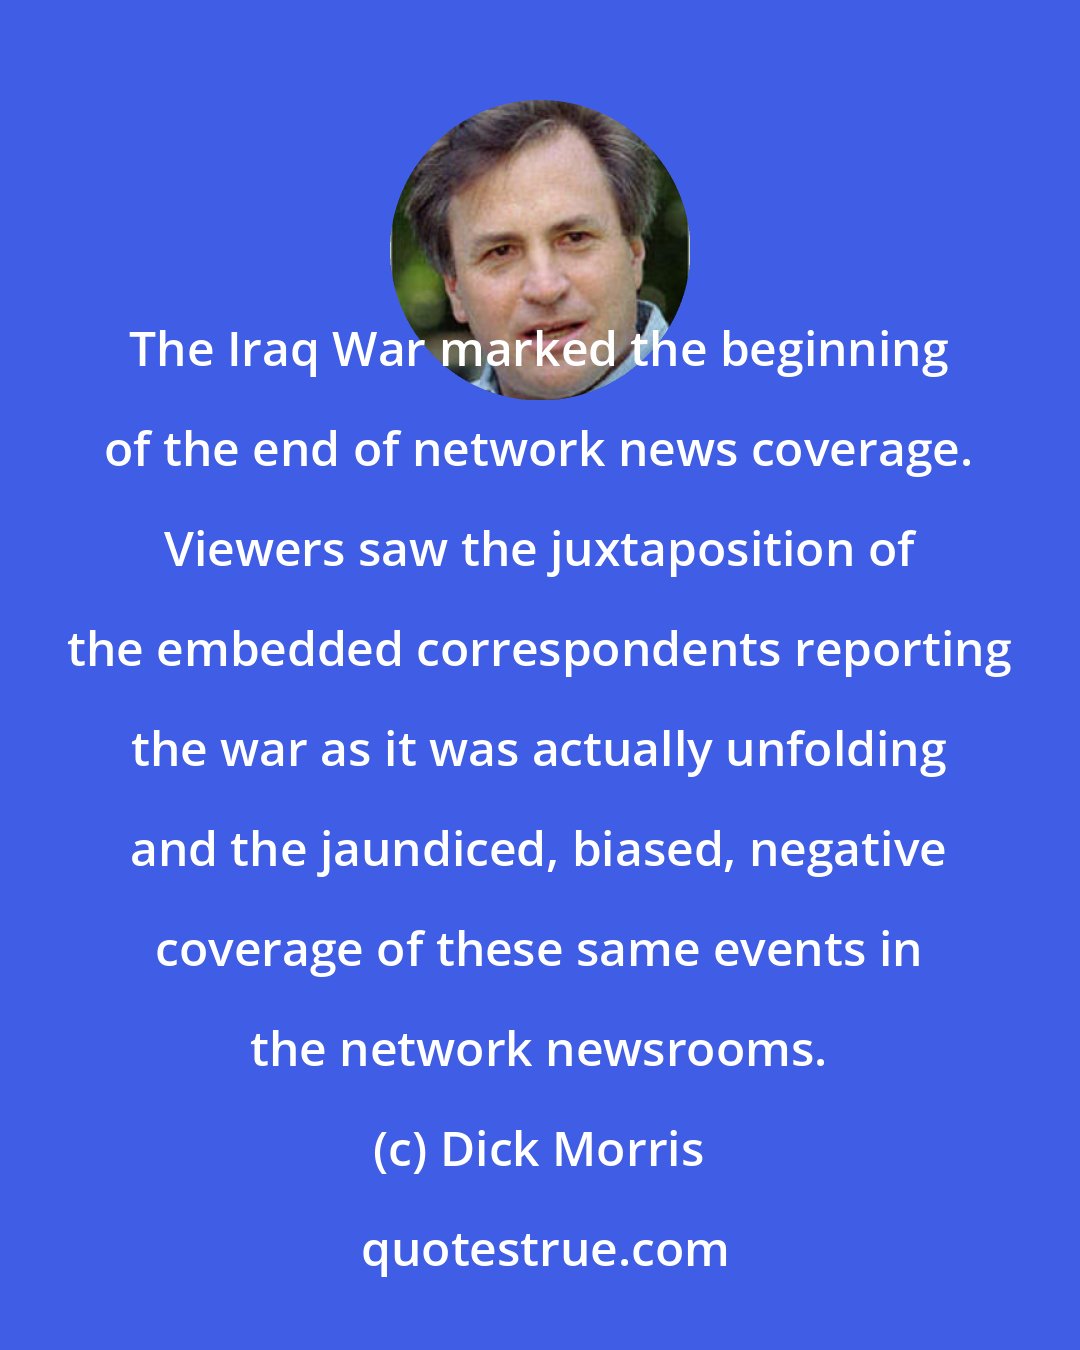 Dick Morris: The Iraq War marked the beginning of the end of network news coverage. Viewers saw the juxtaposition of the embedded correspondents reporting the war as it was actually unfolding and the jaundiced, biased, negative coverage of these same events in the network newsrooms.